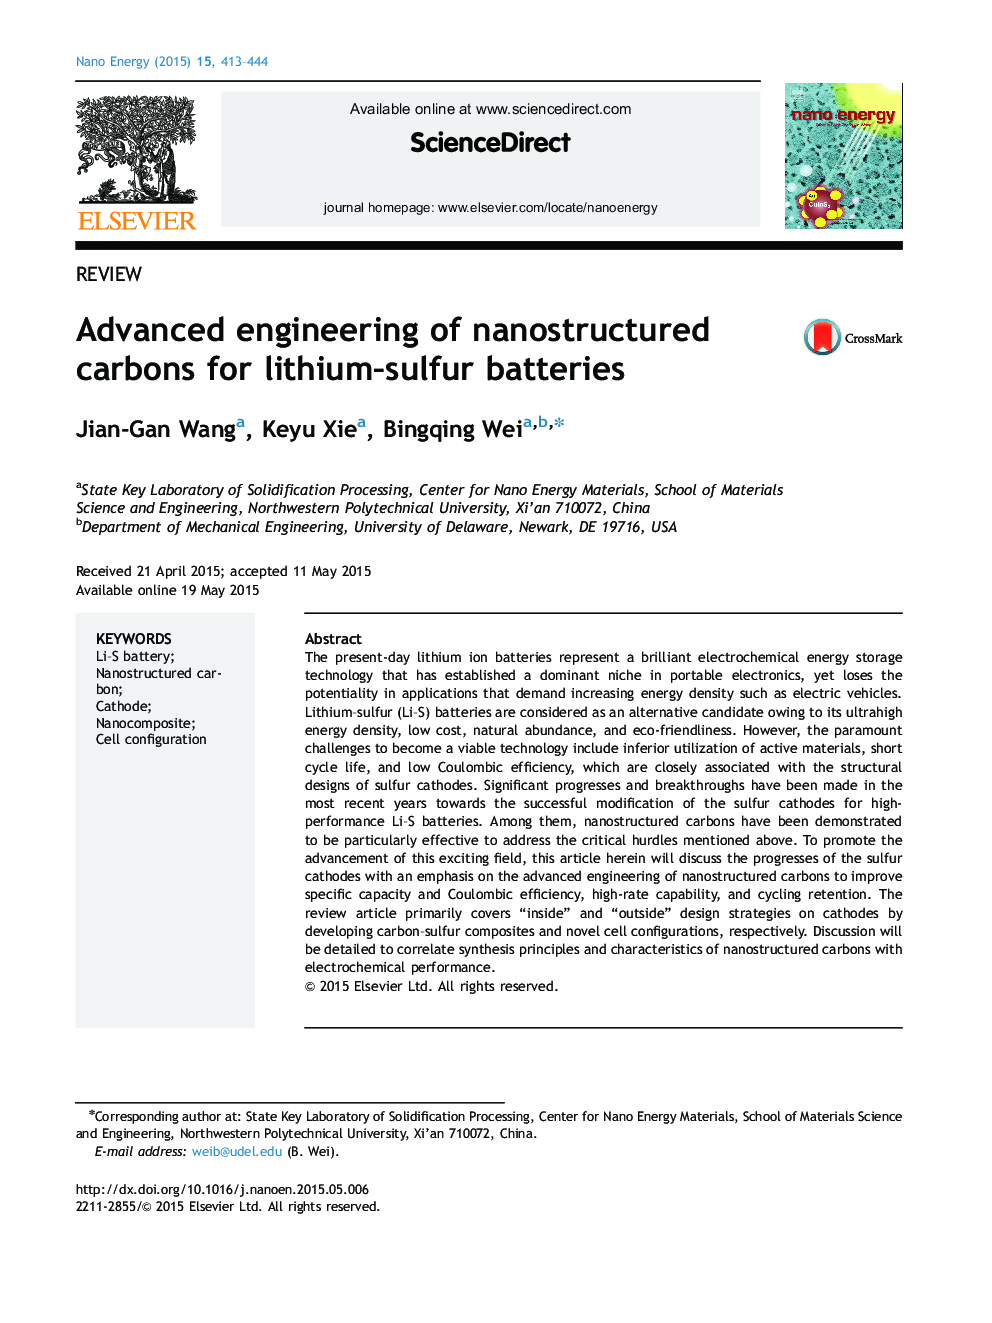 Advanced engineering of nanostructured carbons for lithium-sulfur batteries